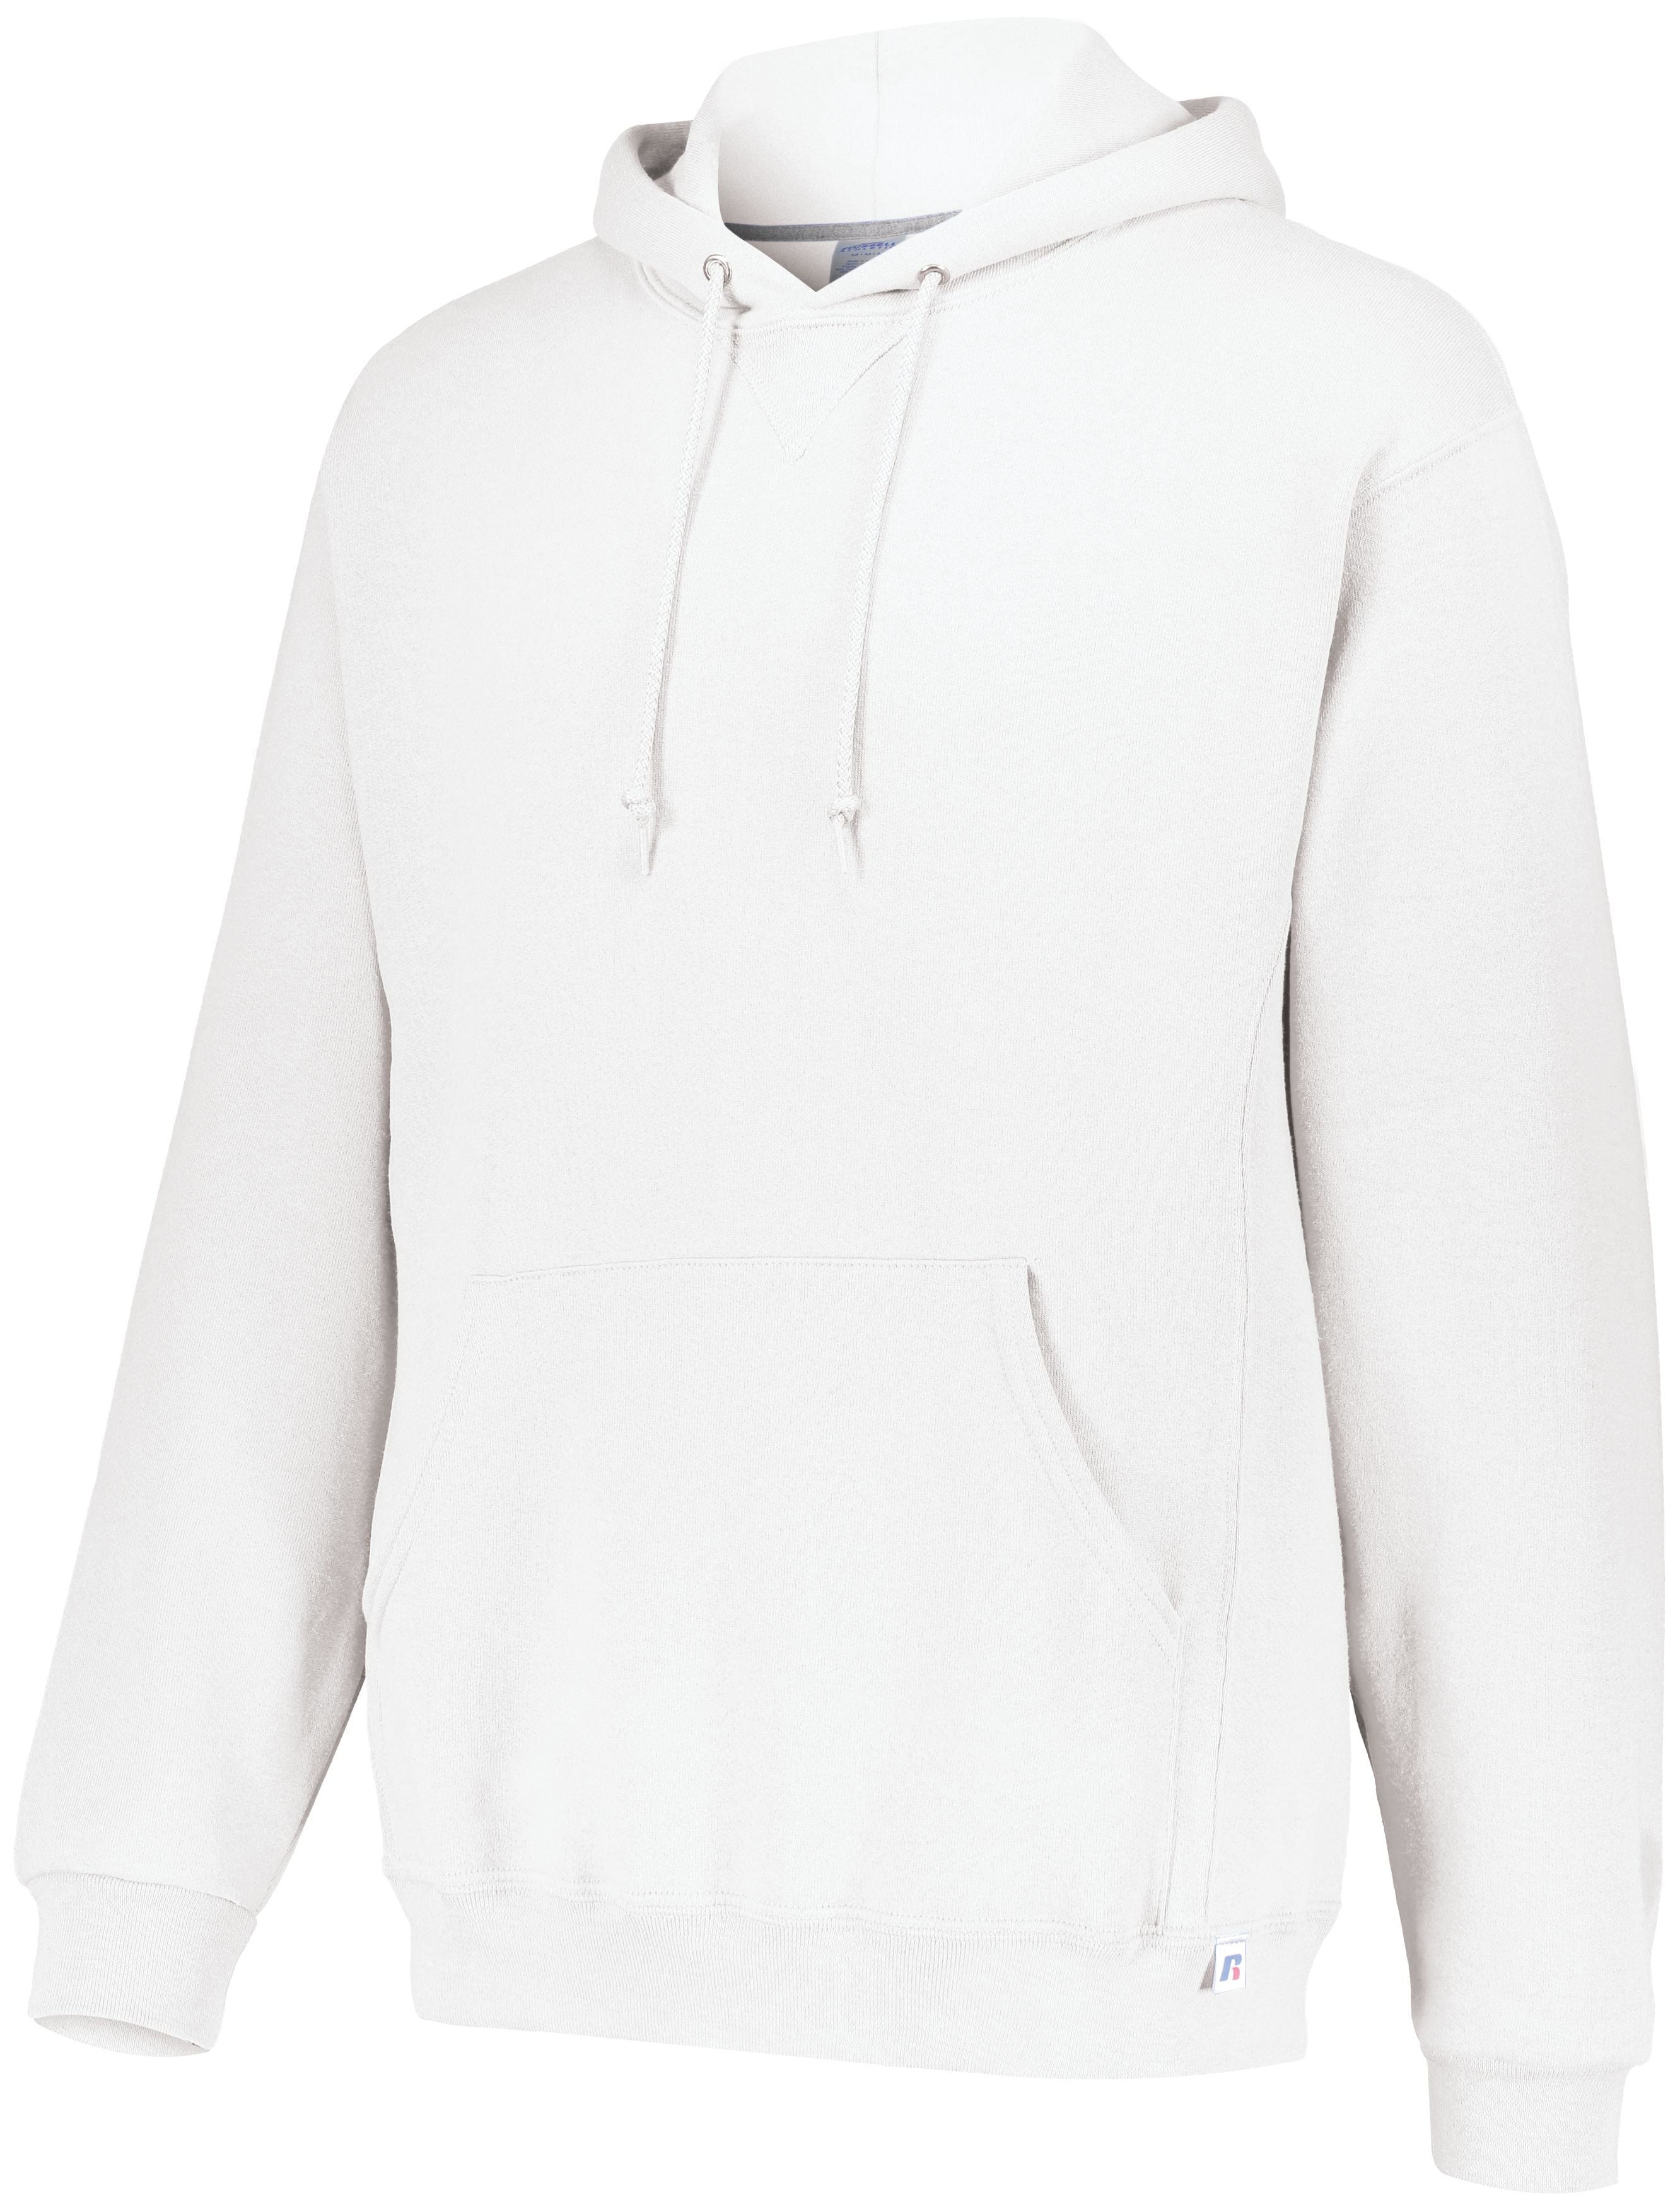 Russell Athletic Dri-Power Fleece Hoodie in White  -Part of the Adult, Russell-Athletic-Products, Shirts product lines at KanaleyCreations.com